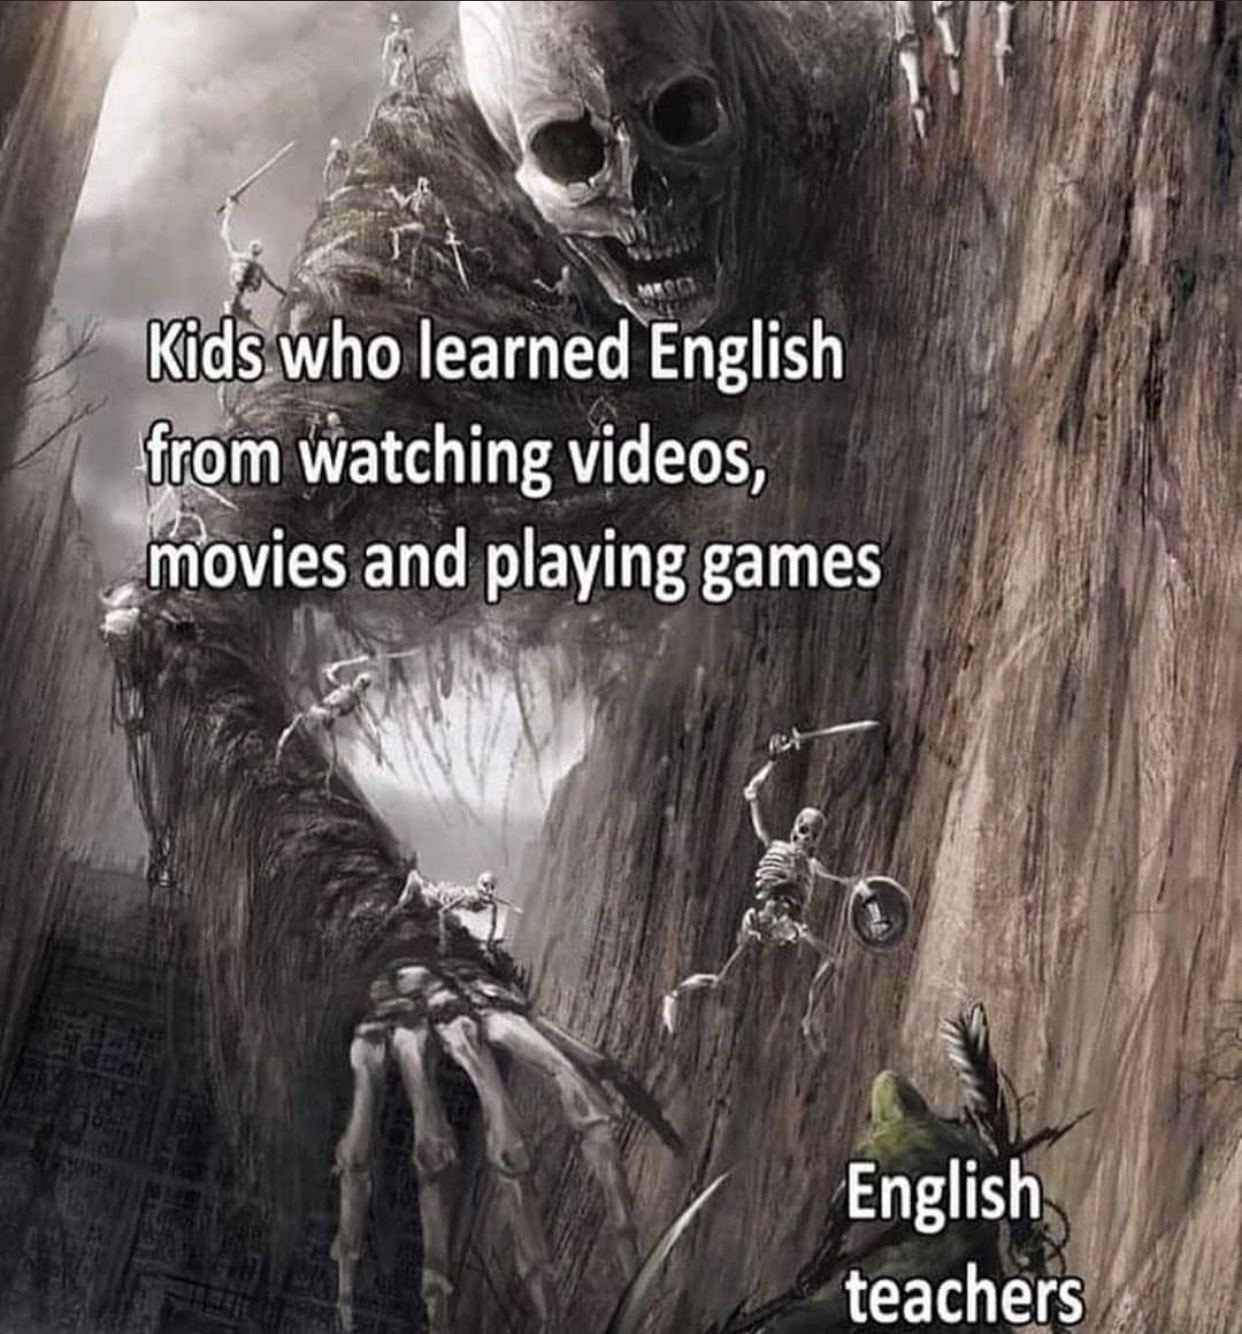 giant scary monsters - Kids who learned English from watching videos, movies and playing games English teachers